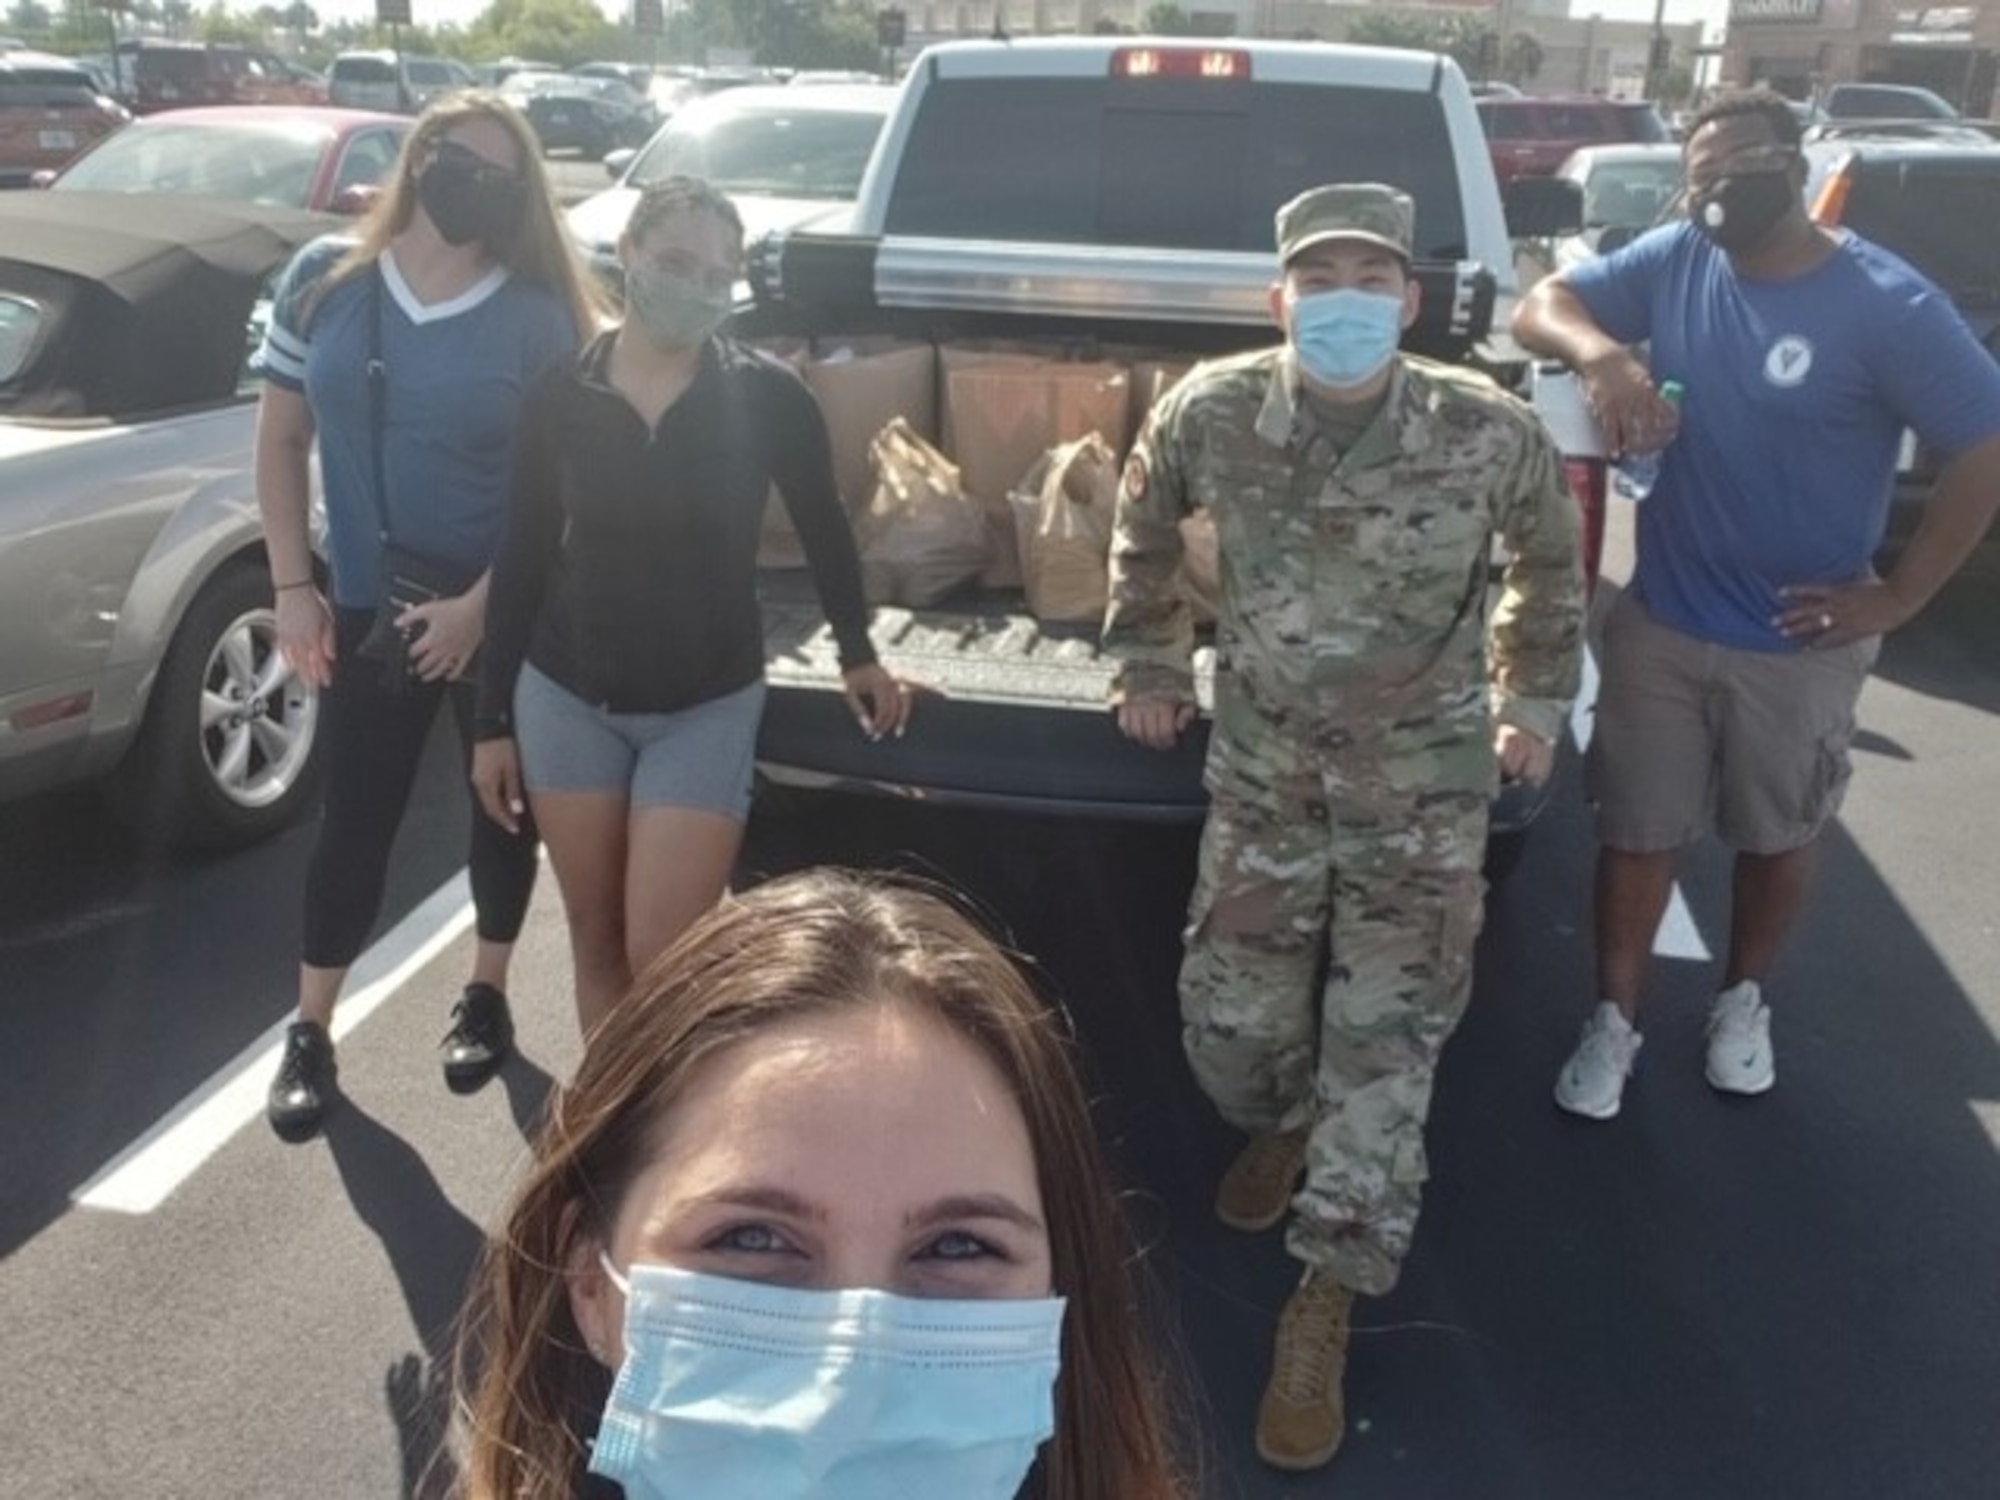 Members of the MacDill Air Force Base 5/6 Council, pause for a photo while donating goods for a homeless care drive, May 23, 2020, in Tampa Fla. Council members collected goods at MacDill Air Force Base, Fla., which were donated to the less fortunate in the Tampa community.